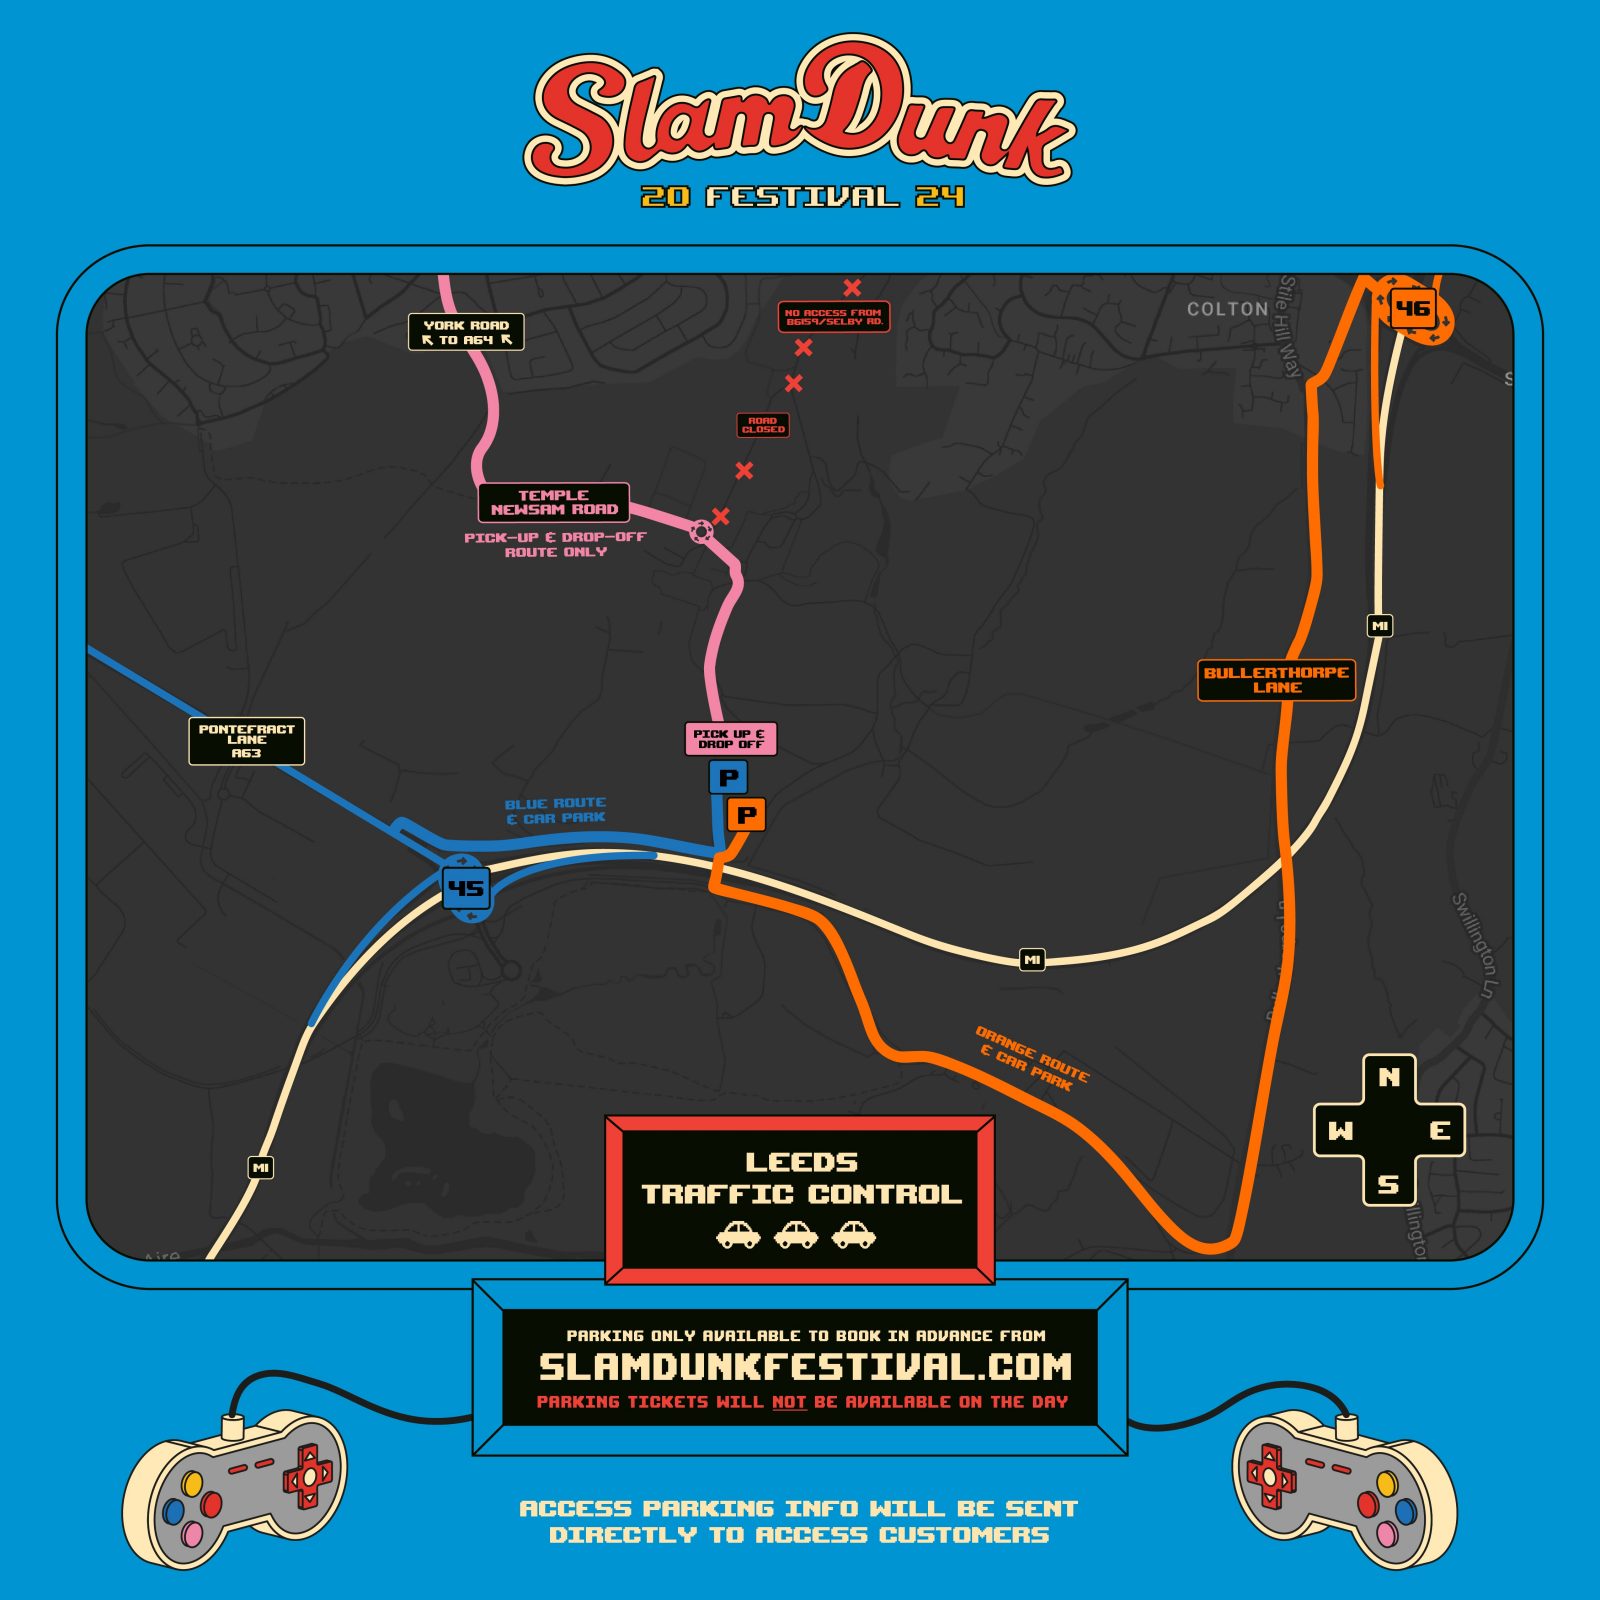 map showing routes into Temple Newsam where Slam Dunk is held.